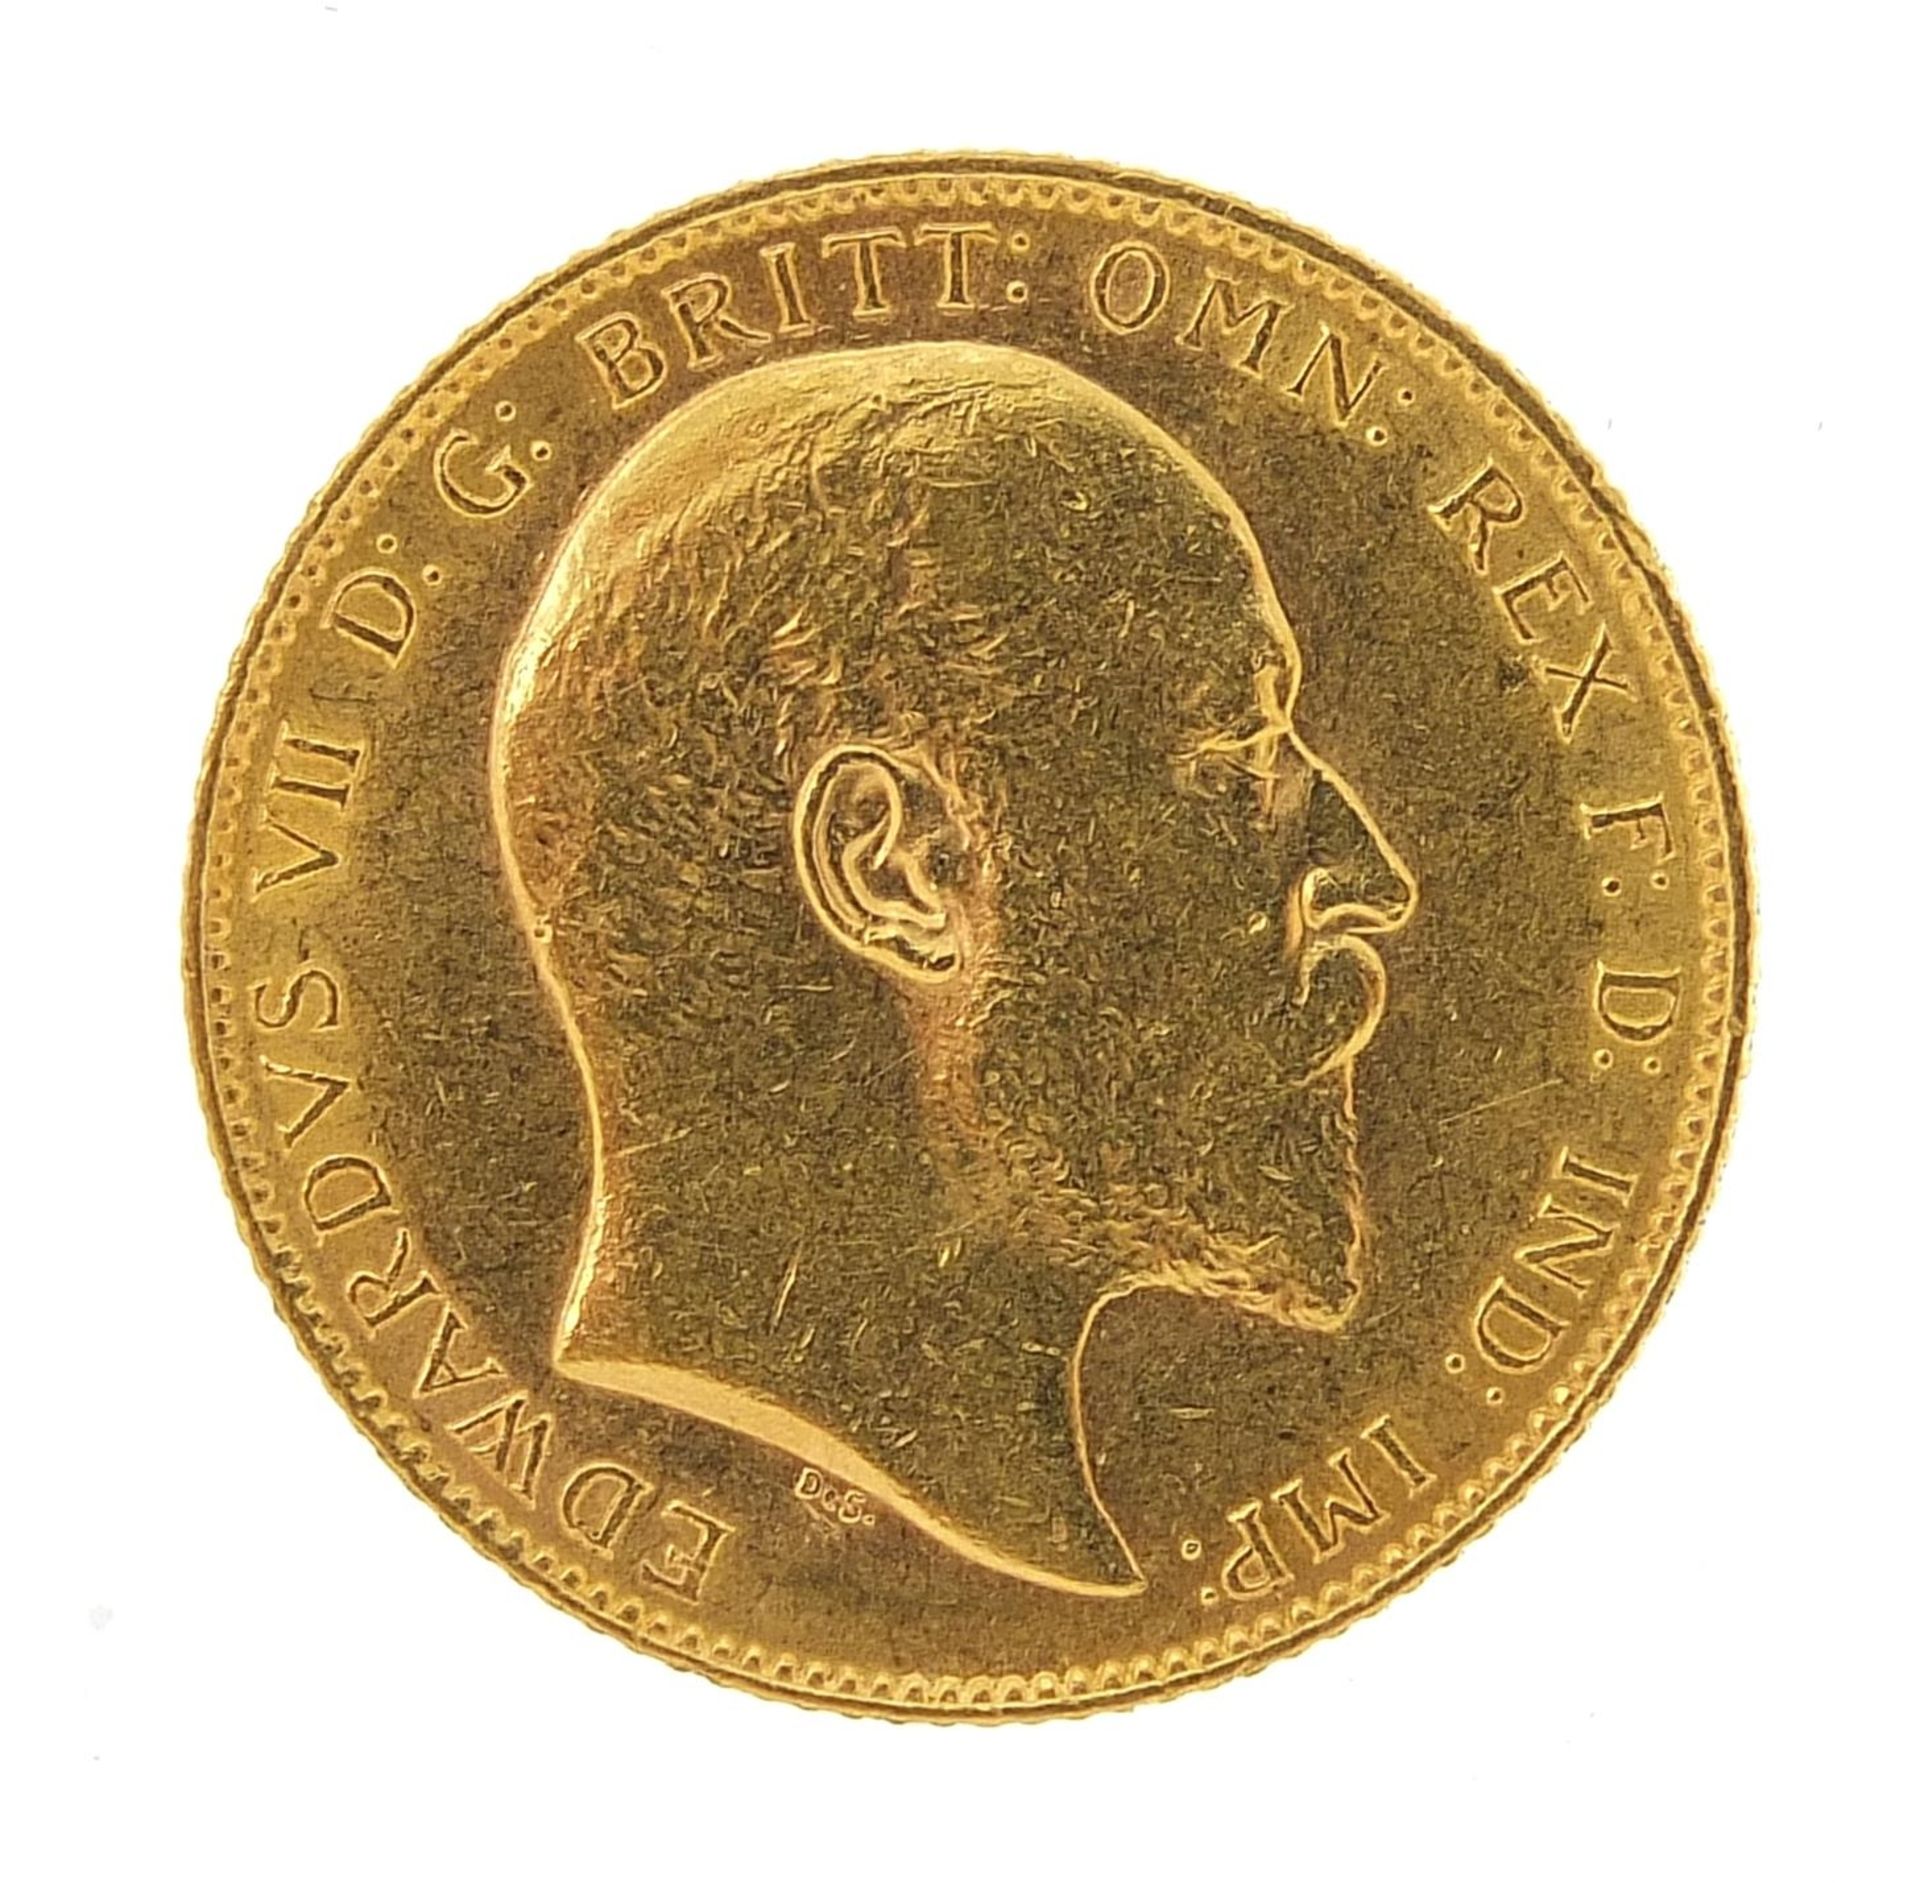 Edward VII 1903 gold sovereign - this lot is sold without buyer's premium - Image 2 of 3